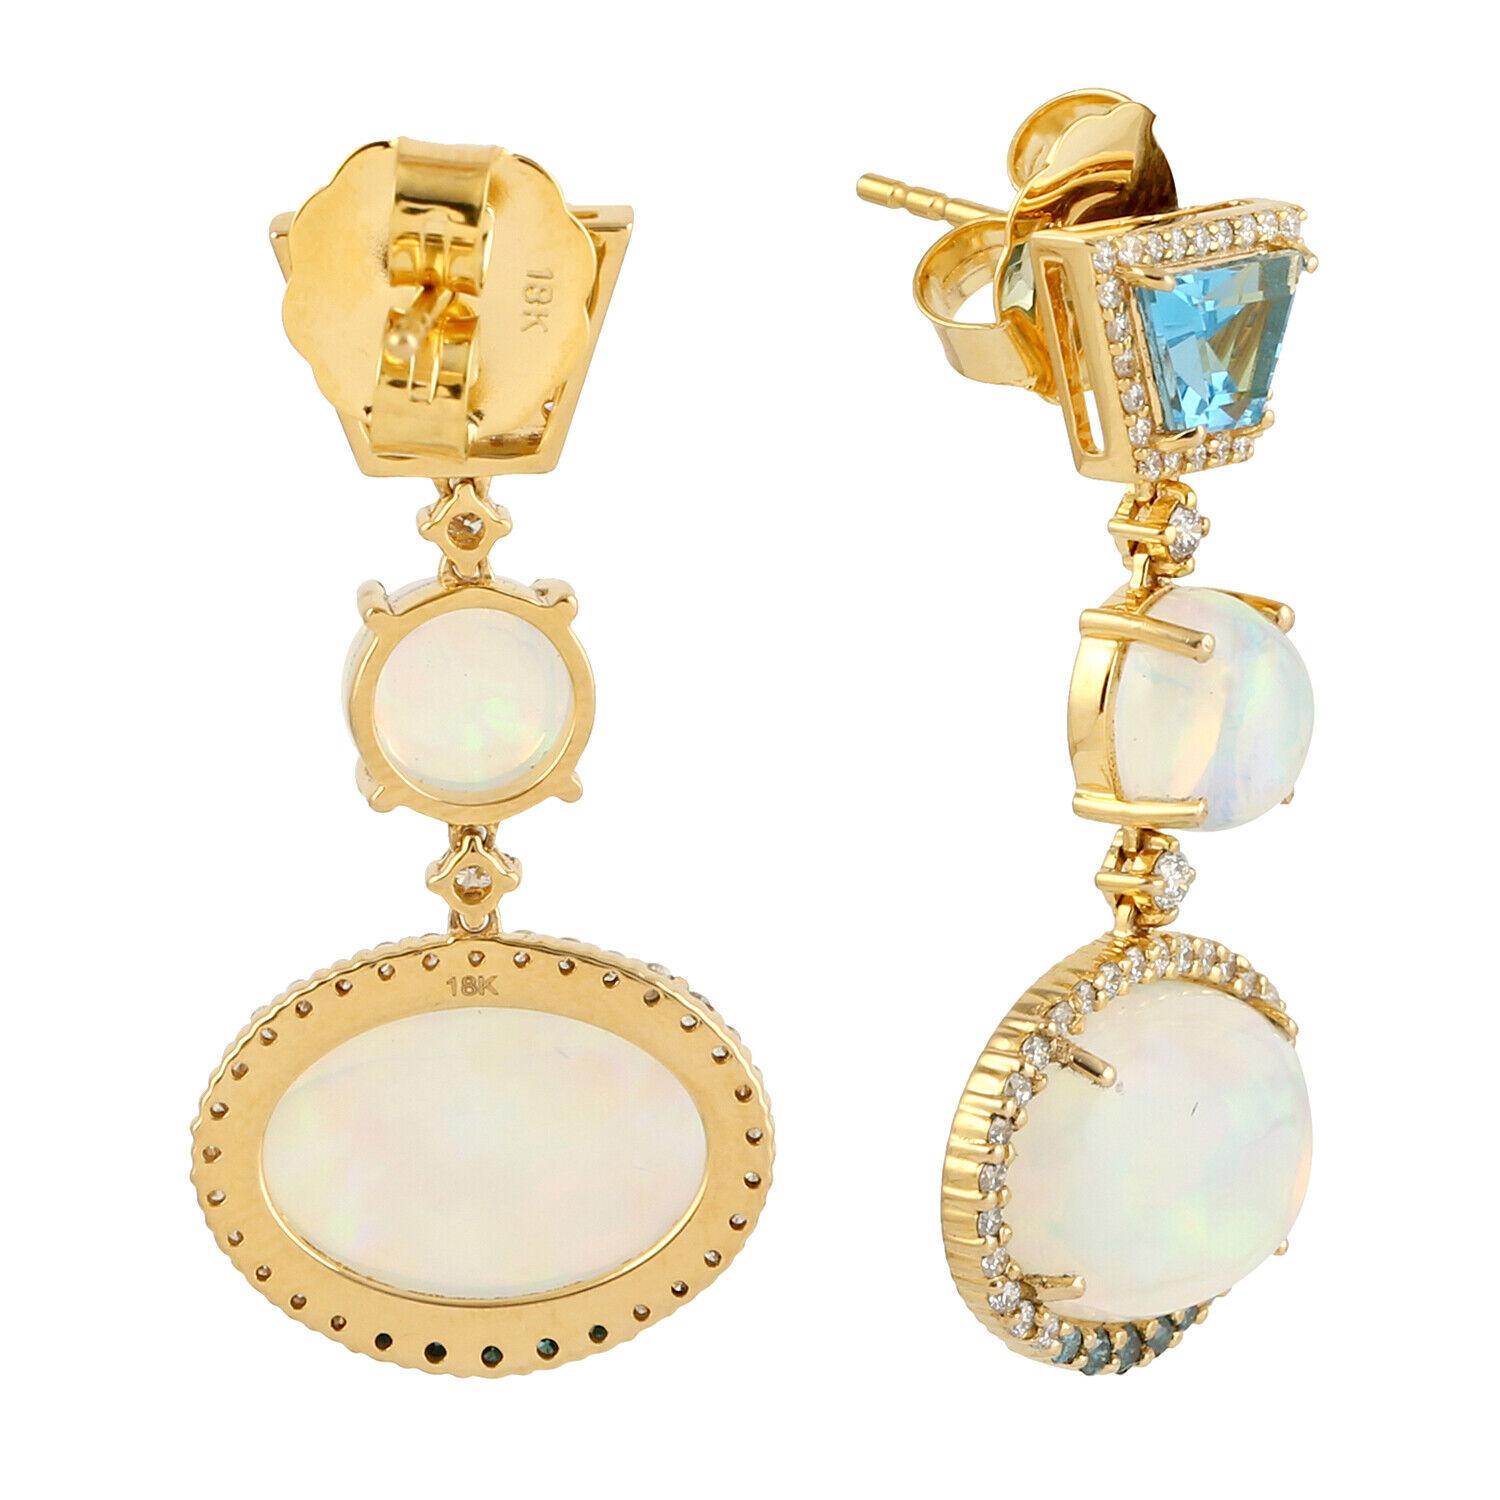 Cast in 14 karat gold. These earrings are hand set in 9.51 carats Ethiopian opal and topaz, .82 carats of sparkling diamonds. 

FOLLOW MEGHNA JEWELS storefront to view the latest collection & exclusive pieces. Meghna Jewels is proudly rated as a Top